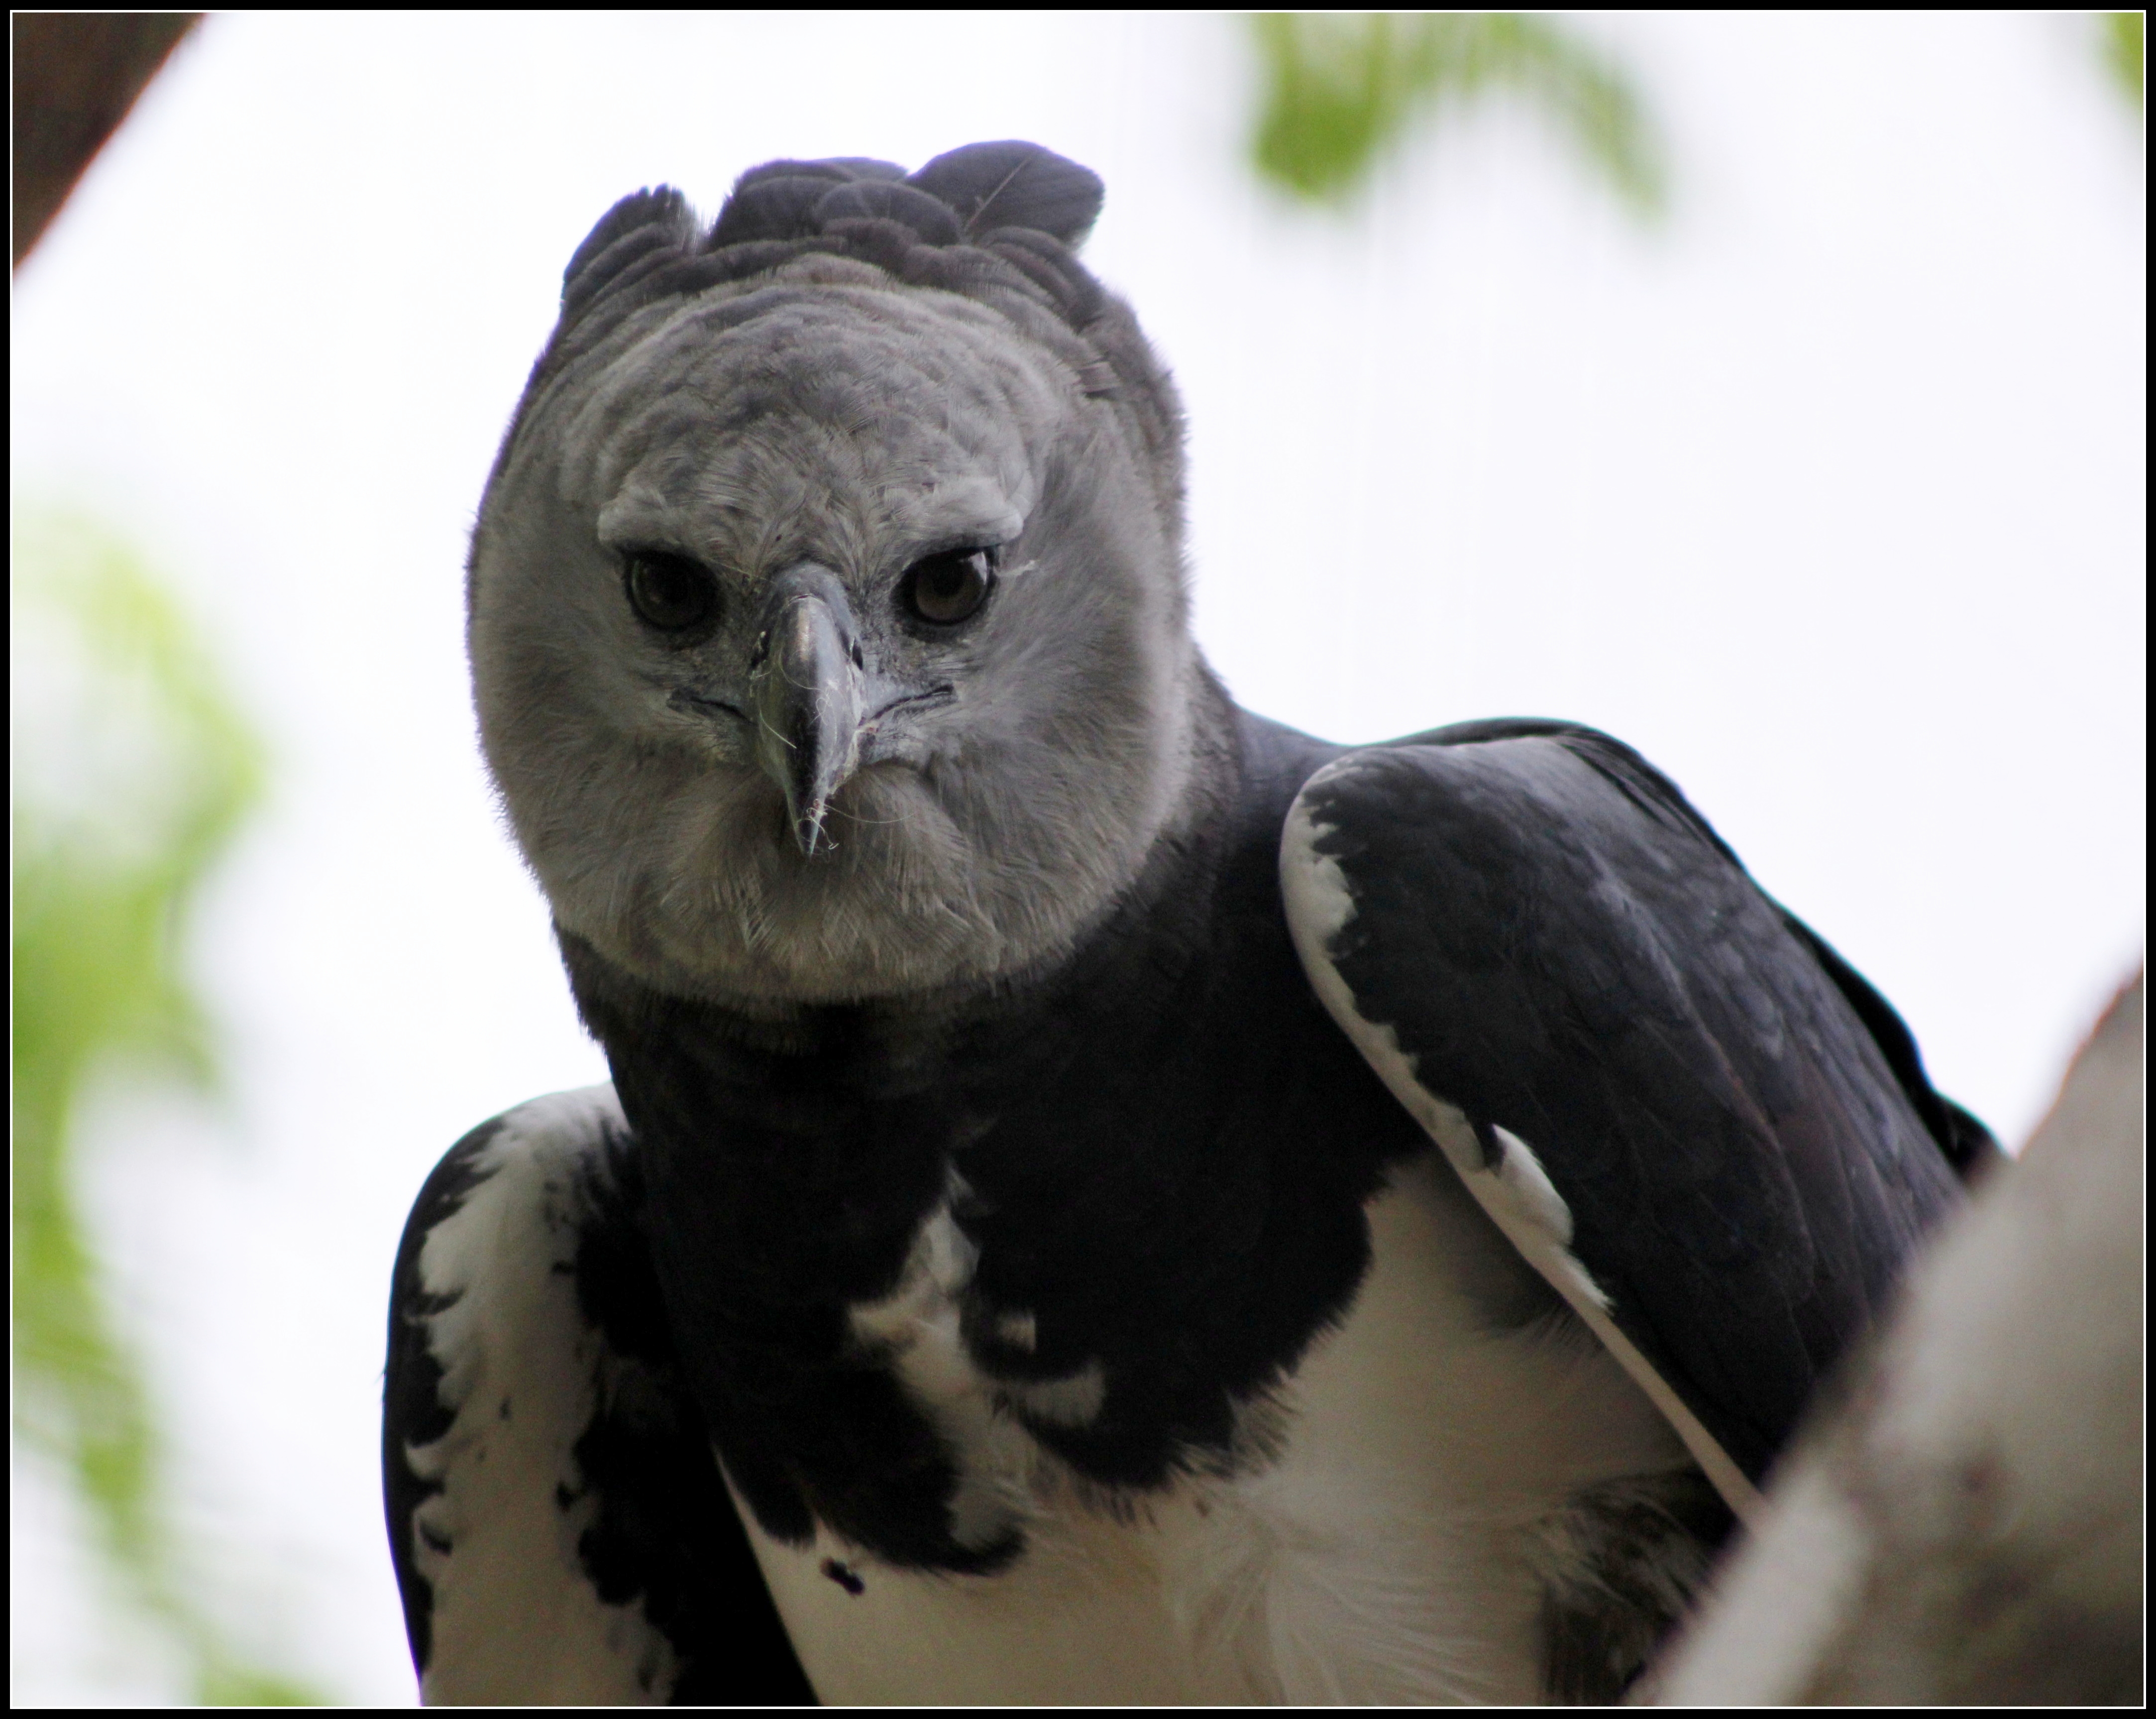 Staring into the eyes of the Harpy Eagle. Photo taken by cuatrok77, published on Flickr